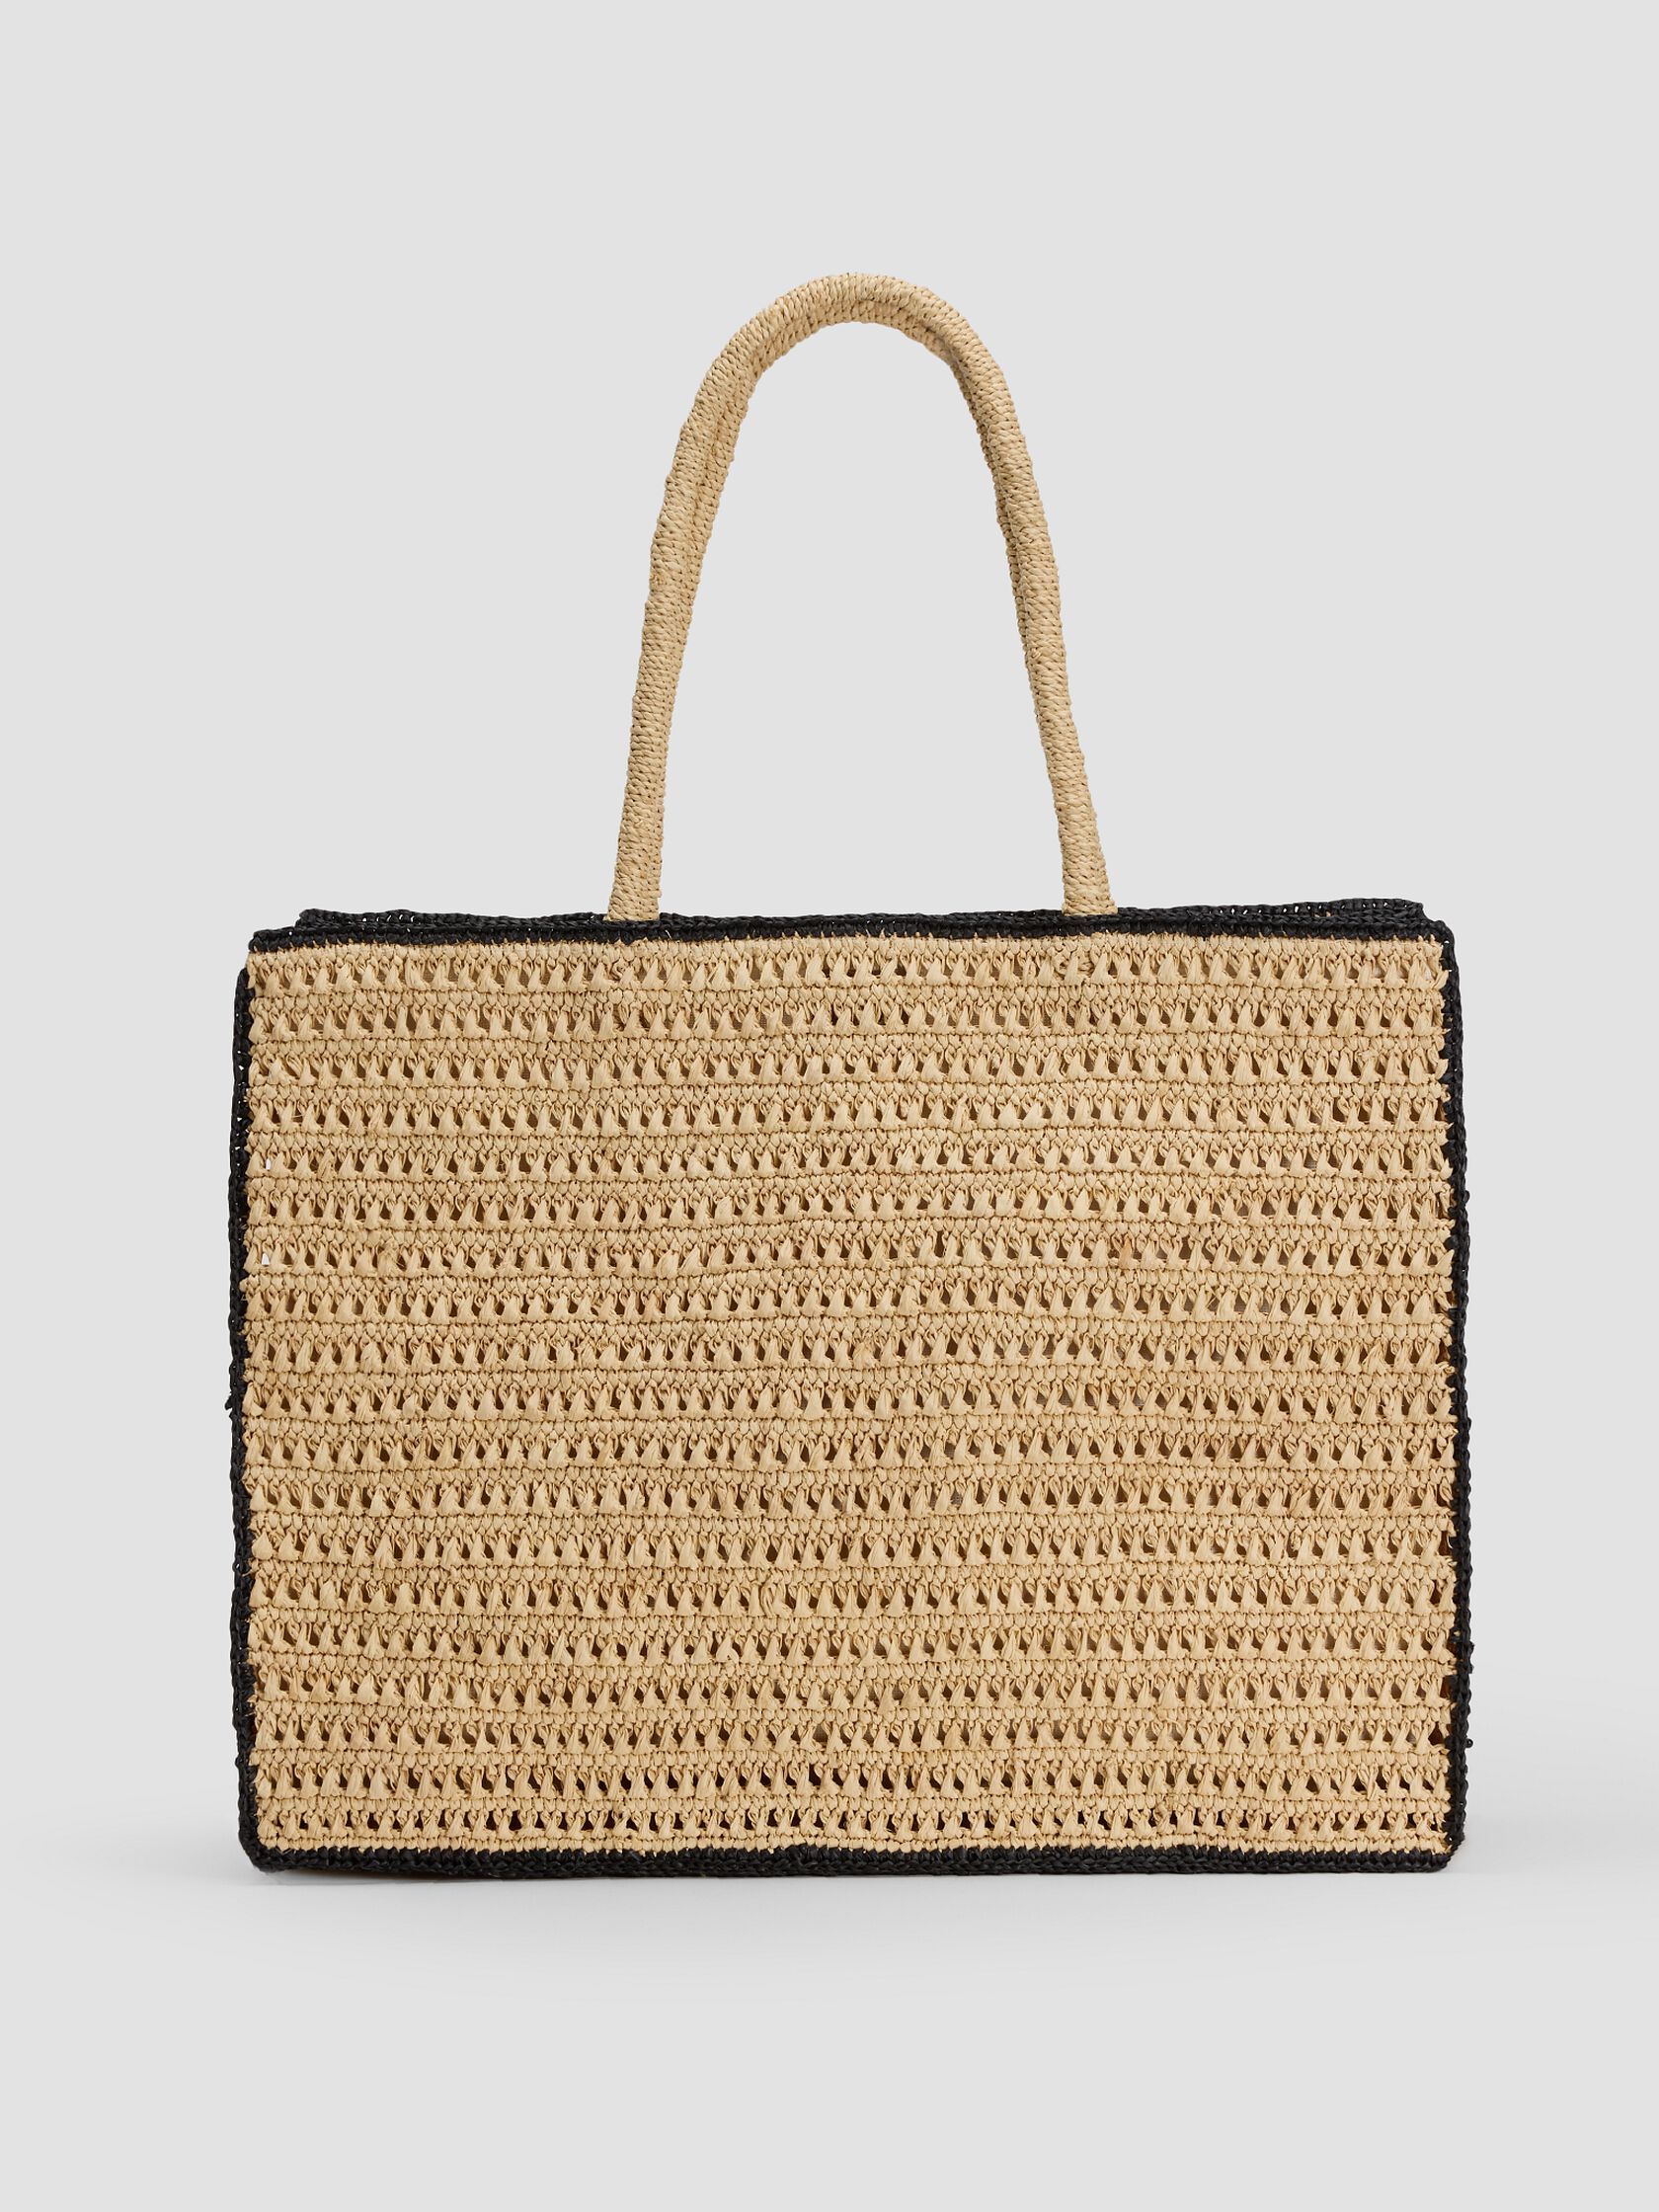 Mar Y Sol for EILEEN FISHER Tote | Eileen Fisher